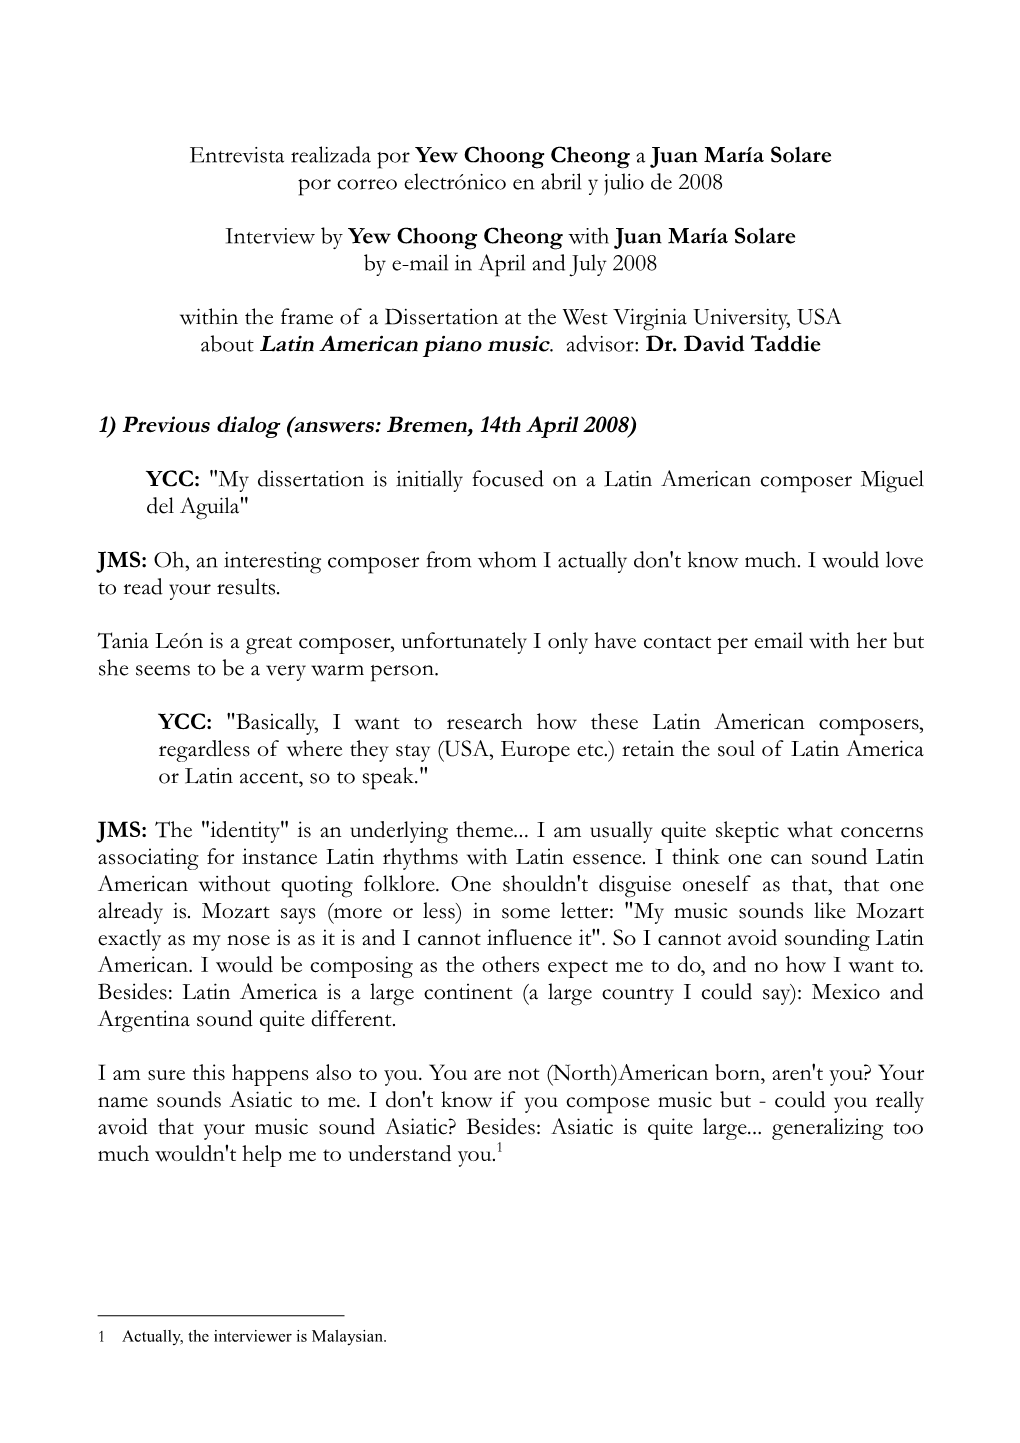 Interview by Yew Choong Cheong with Juan María Solare by E-Mail in April and July 2008